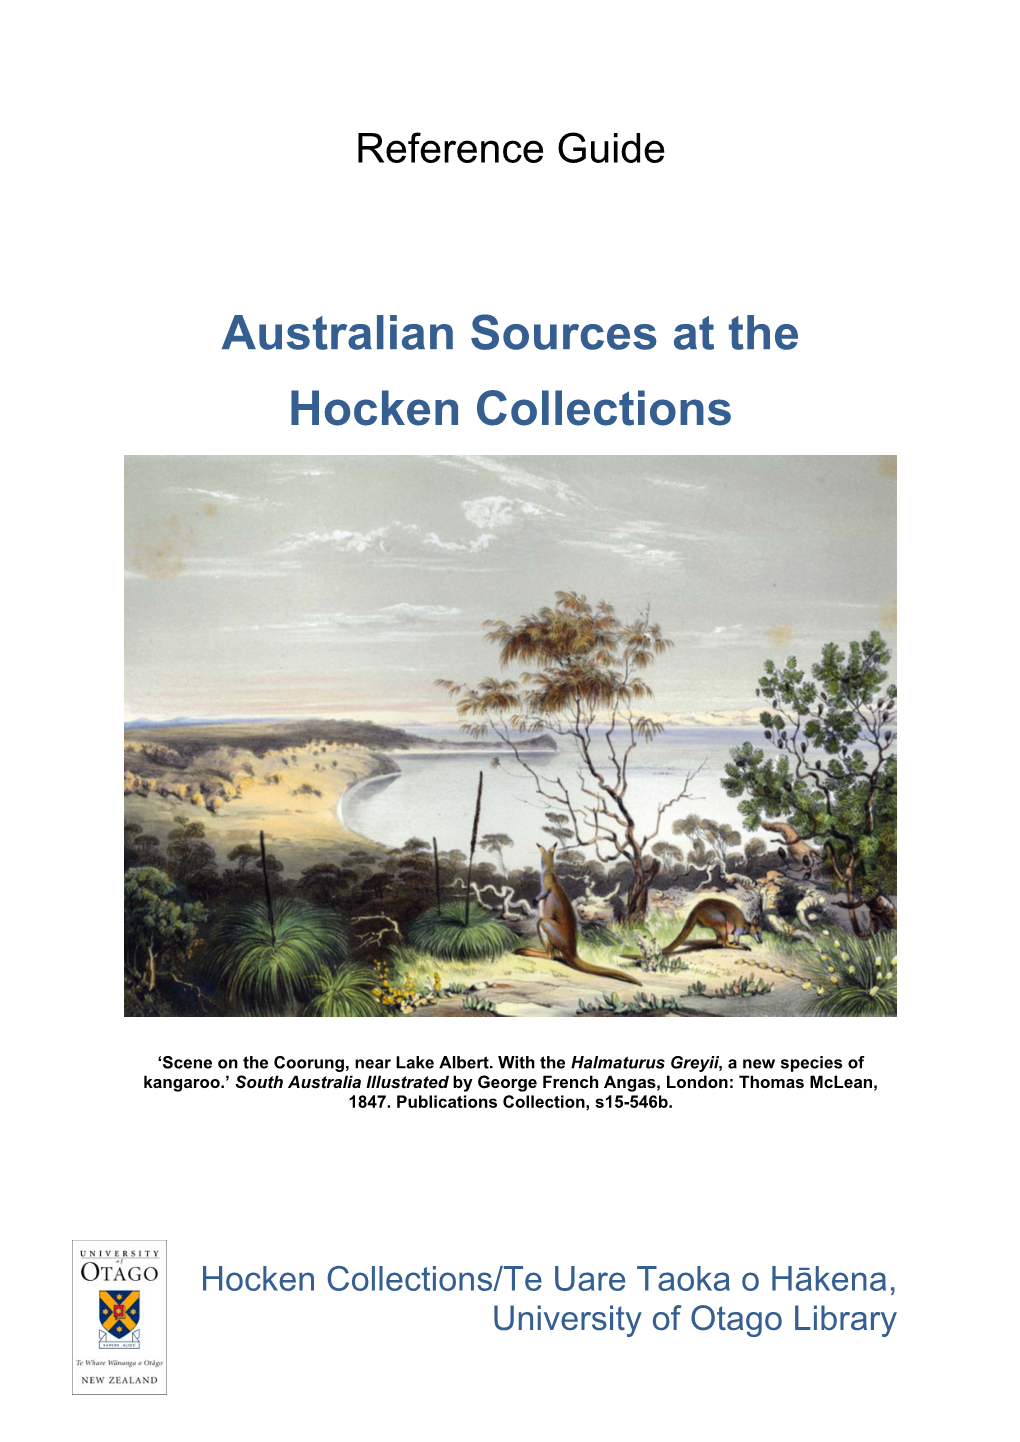 Australian Sources at the Hocken Collections